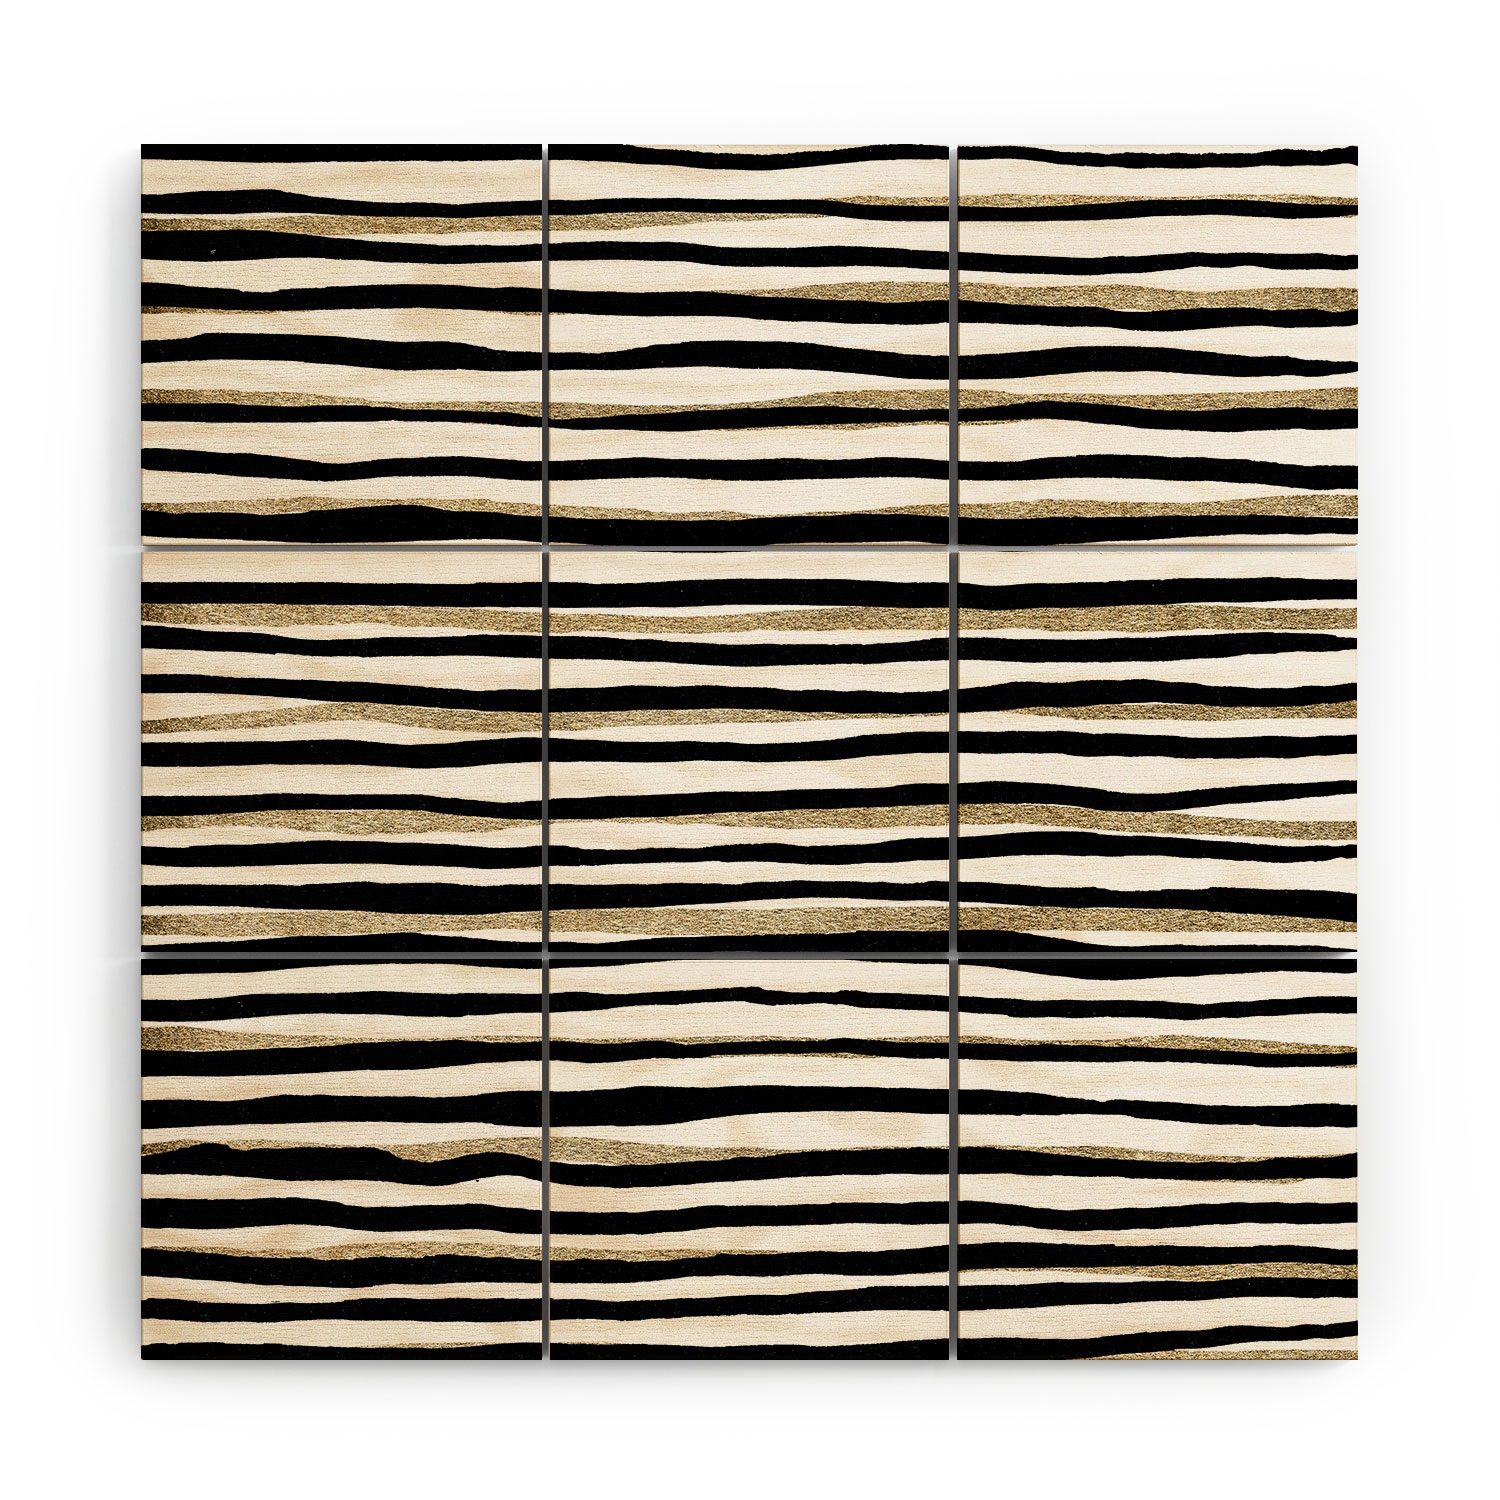 Black And Gold Stripes by Georgiana Paraschiv - Wood Wall Mural3' X 3' (Nine 12" Wood Squares) - Image 3